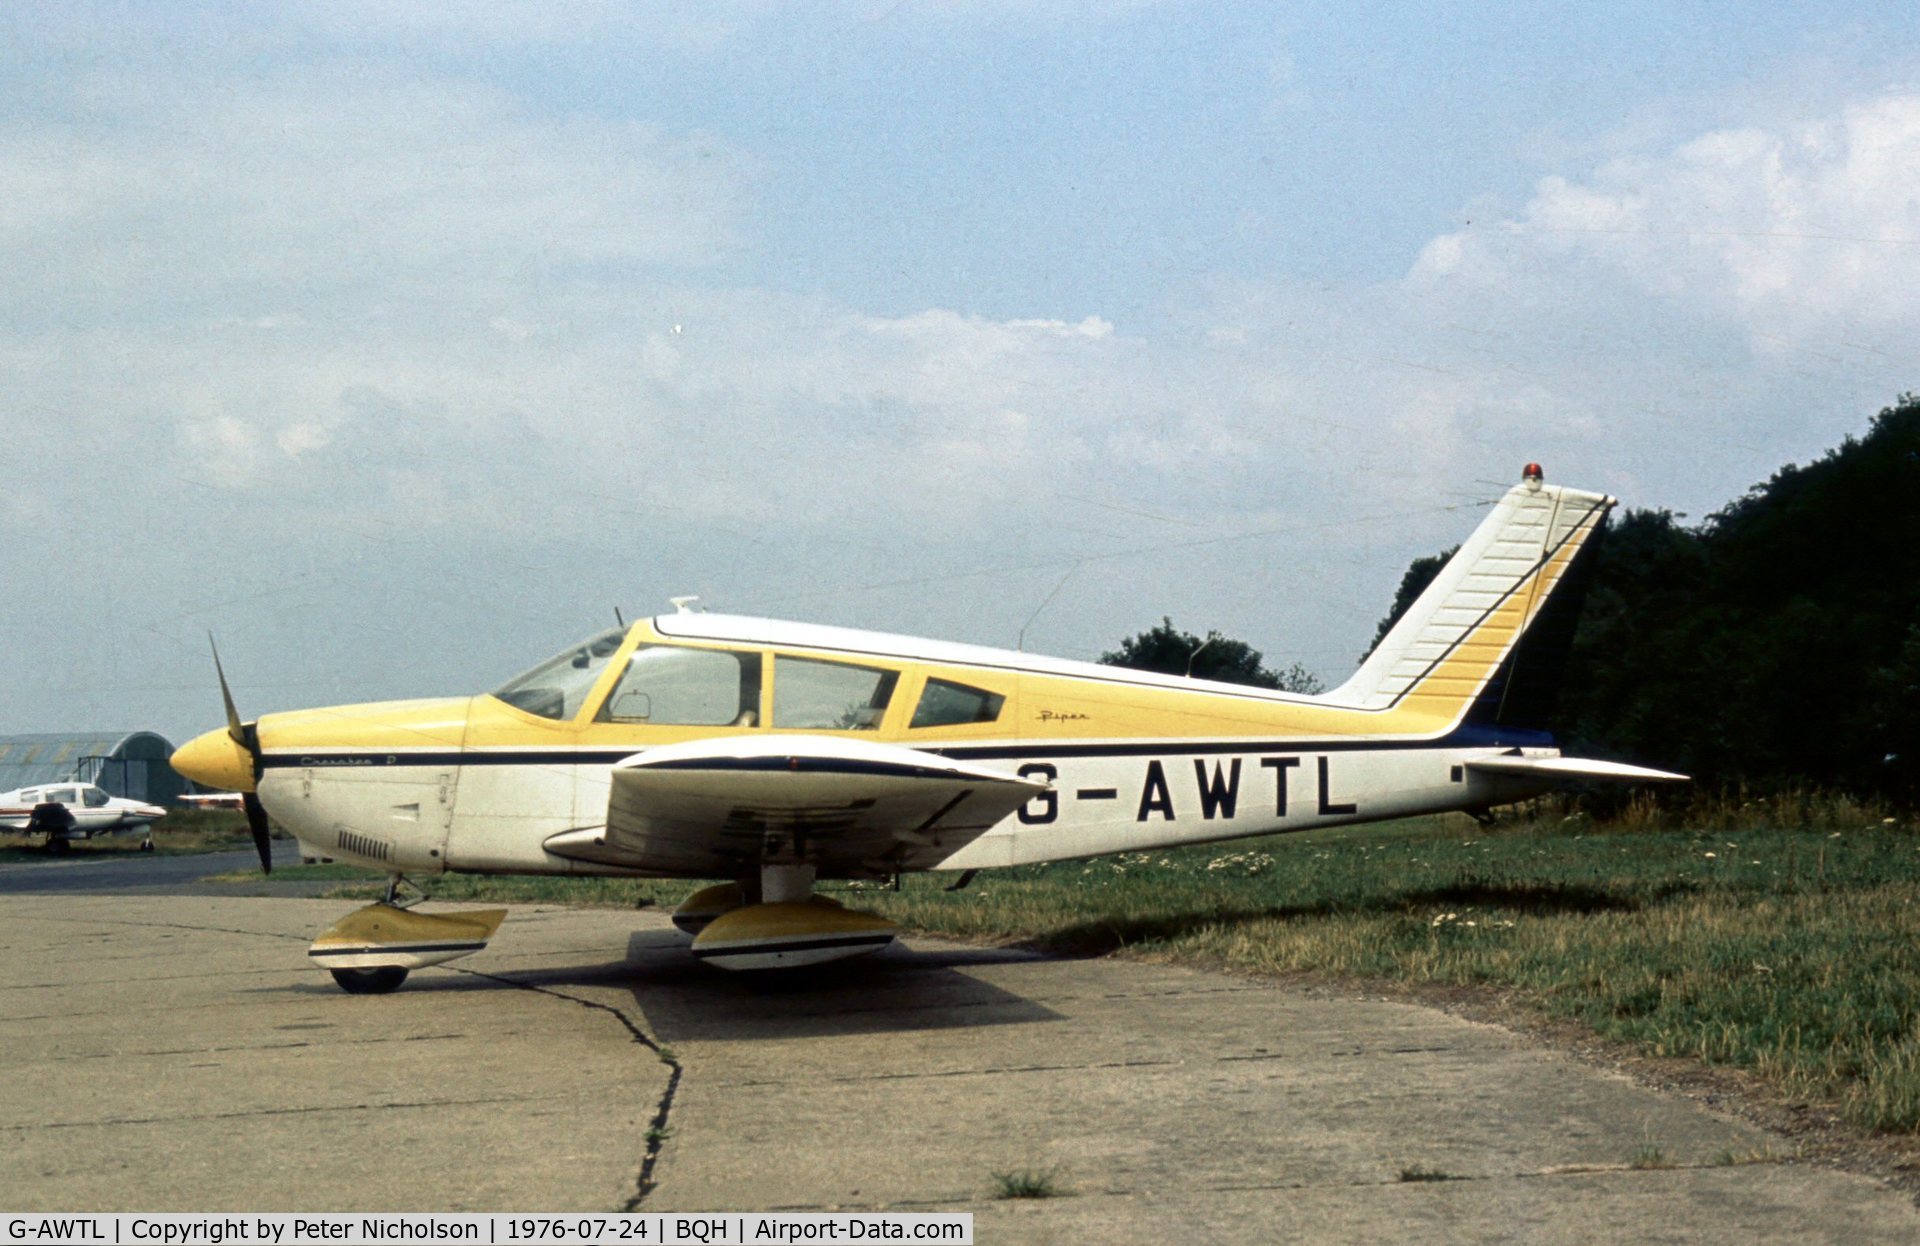 G-AWTL, 1968 Piper PA-28-180 Cherokee C/N 28-5068, A long-term resident at Biggin Hill as seen in the Summer of 1976.